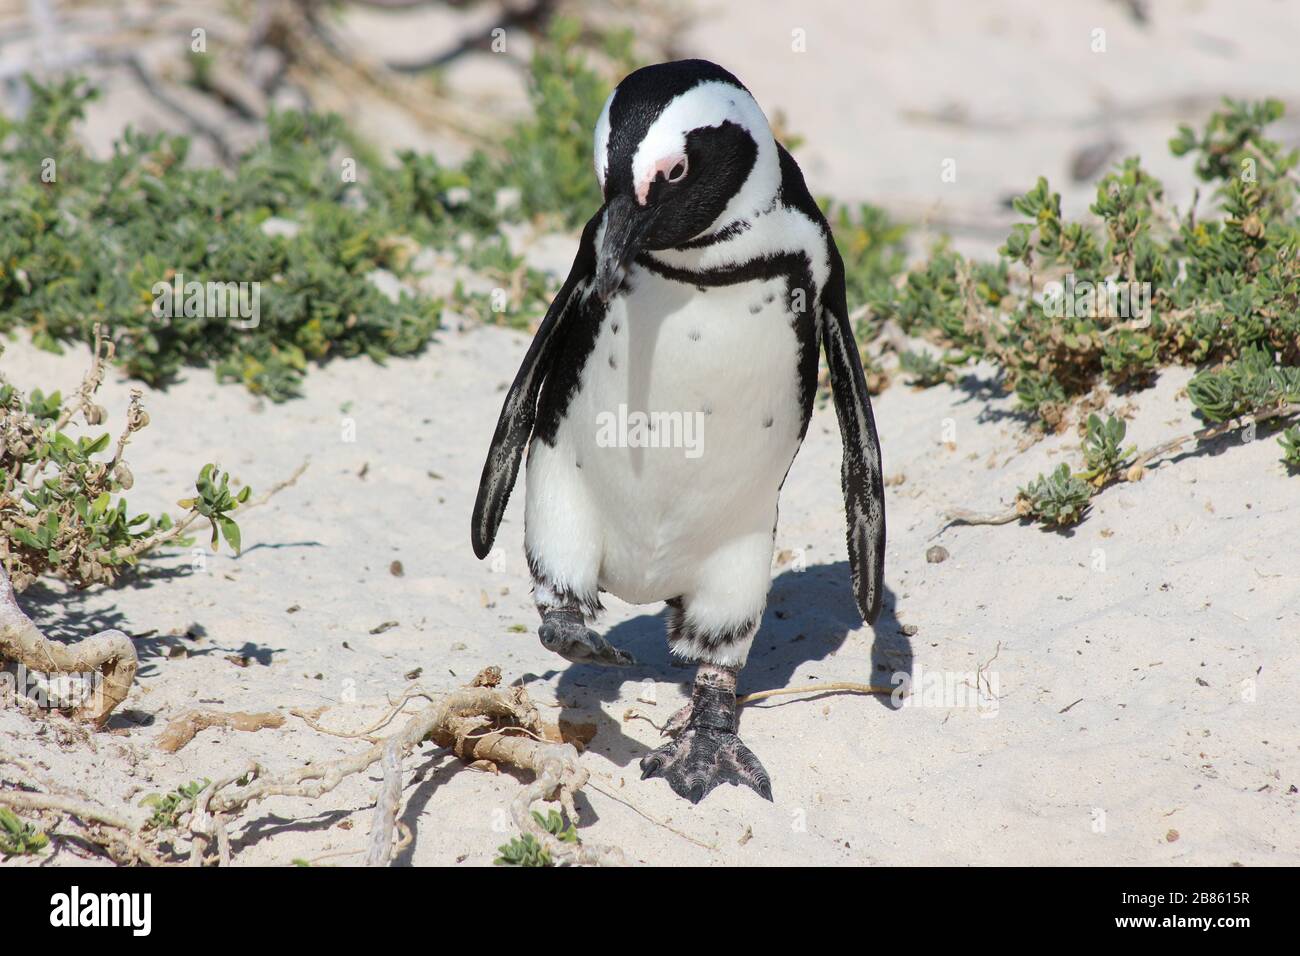 African Black Footed Penguin endemic to the South African Coast Stock Photo